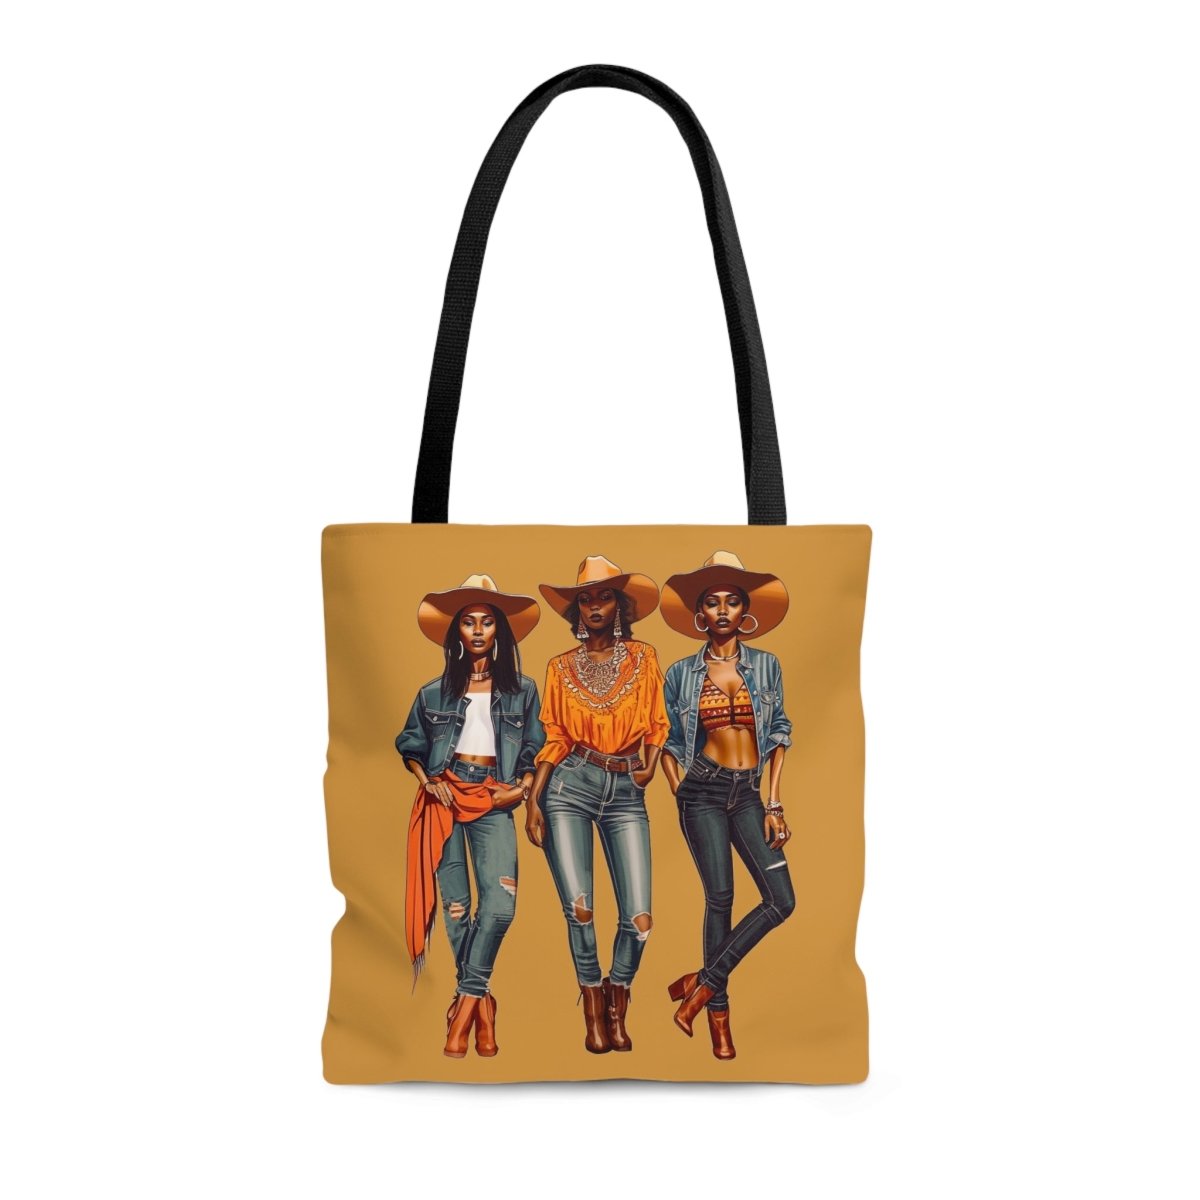 Cowgirls Tote Bag - The Trini Gee